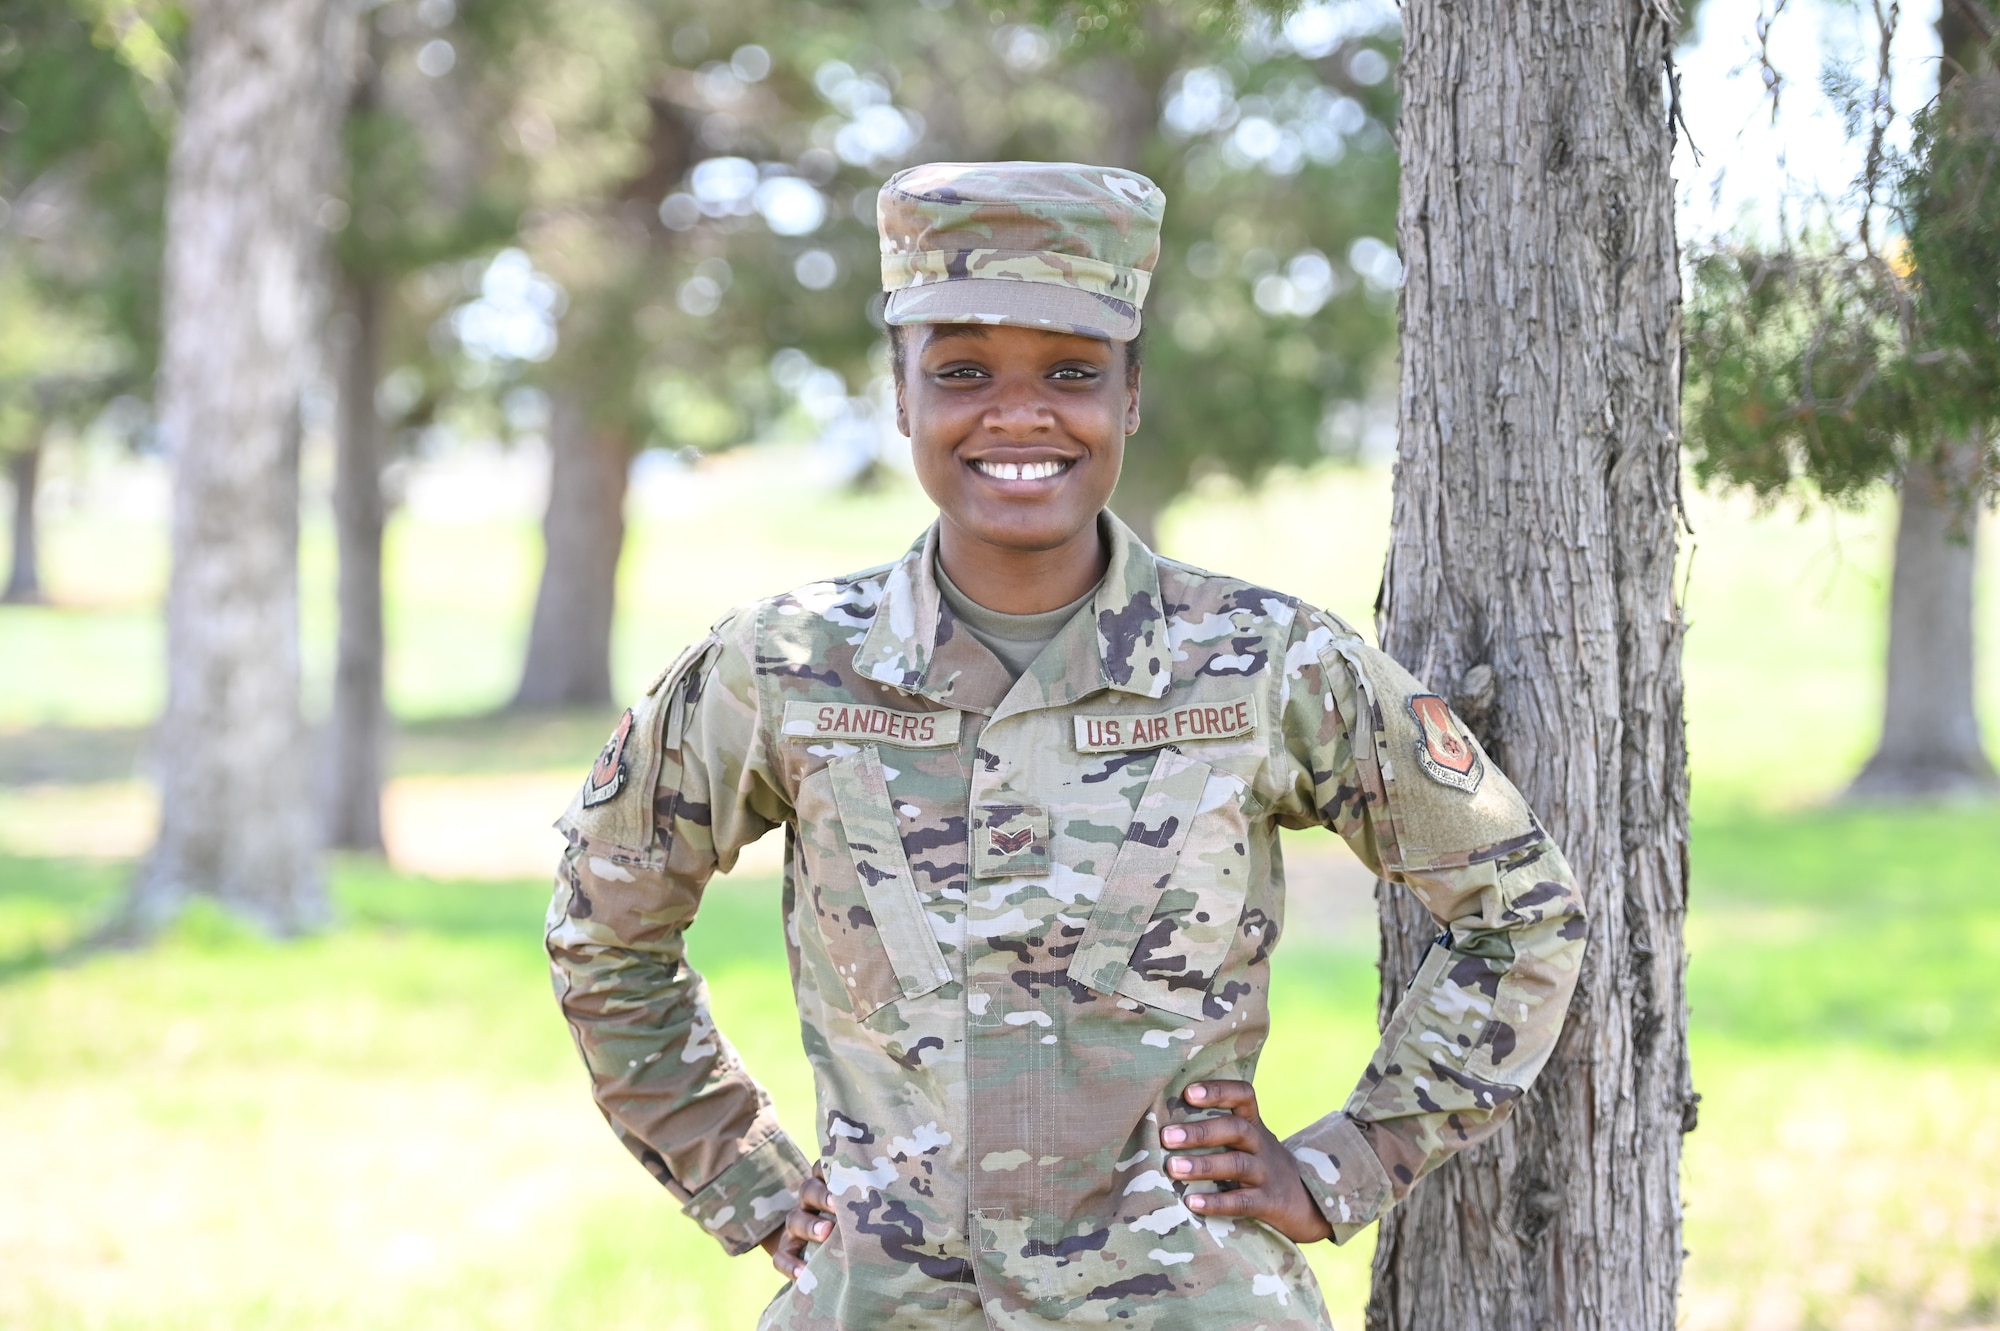 Senior Airman Lelauni Sanders, Air Force Sustainment Center Contracting Directorate, pictured here Aug. 23, 2021, at Hill Air Force Base, Utah